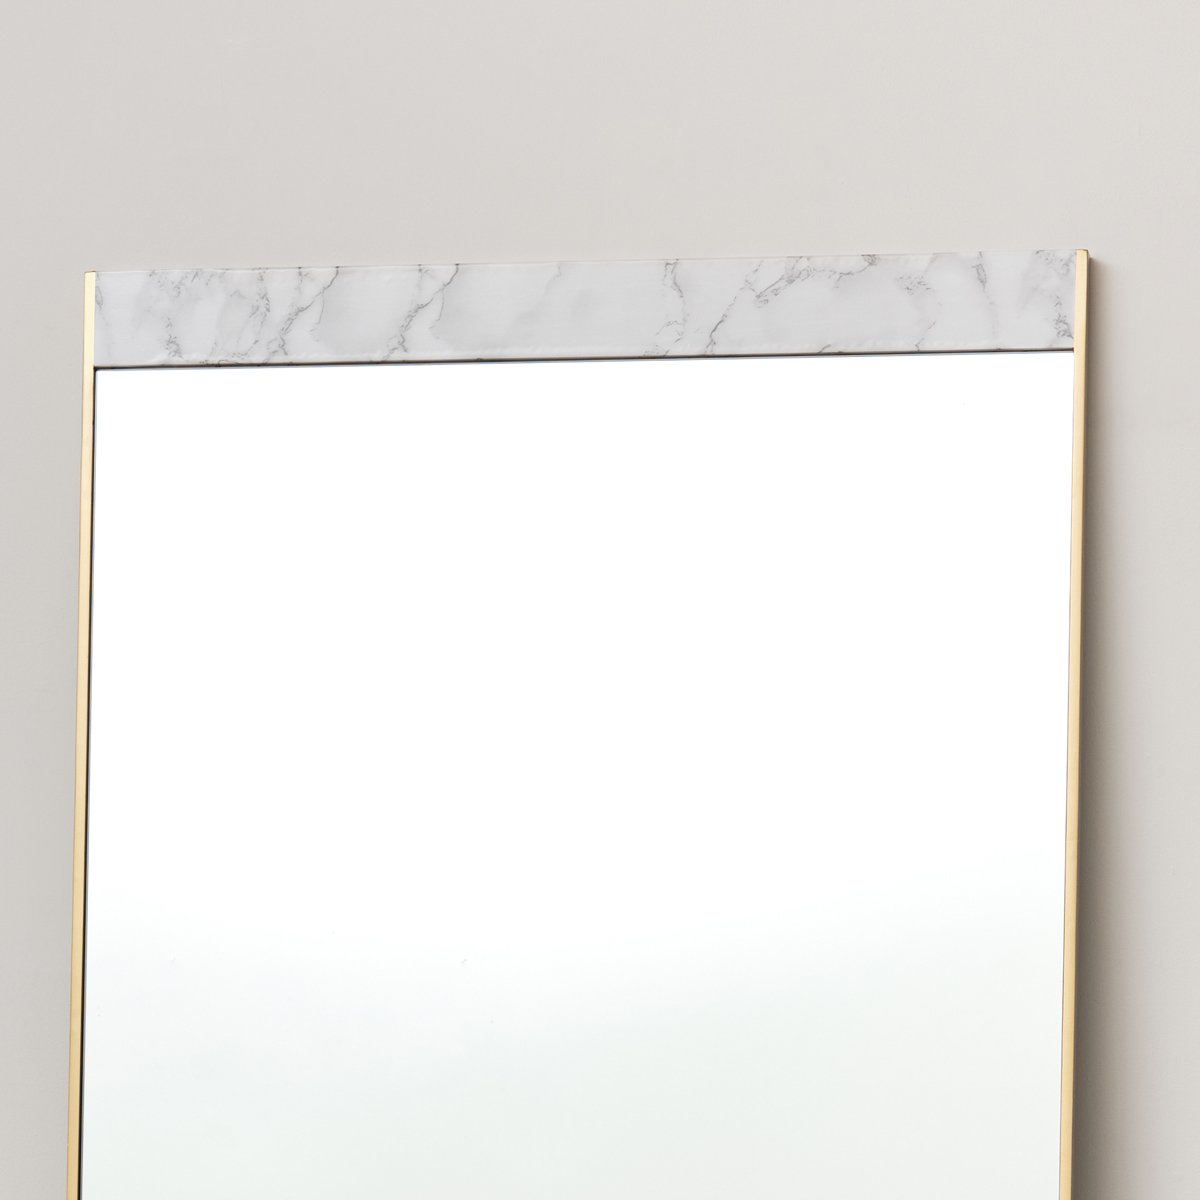 Luxe Gold & Faux Marble Mirror - Large 155cm x 75cm